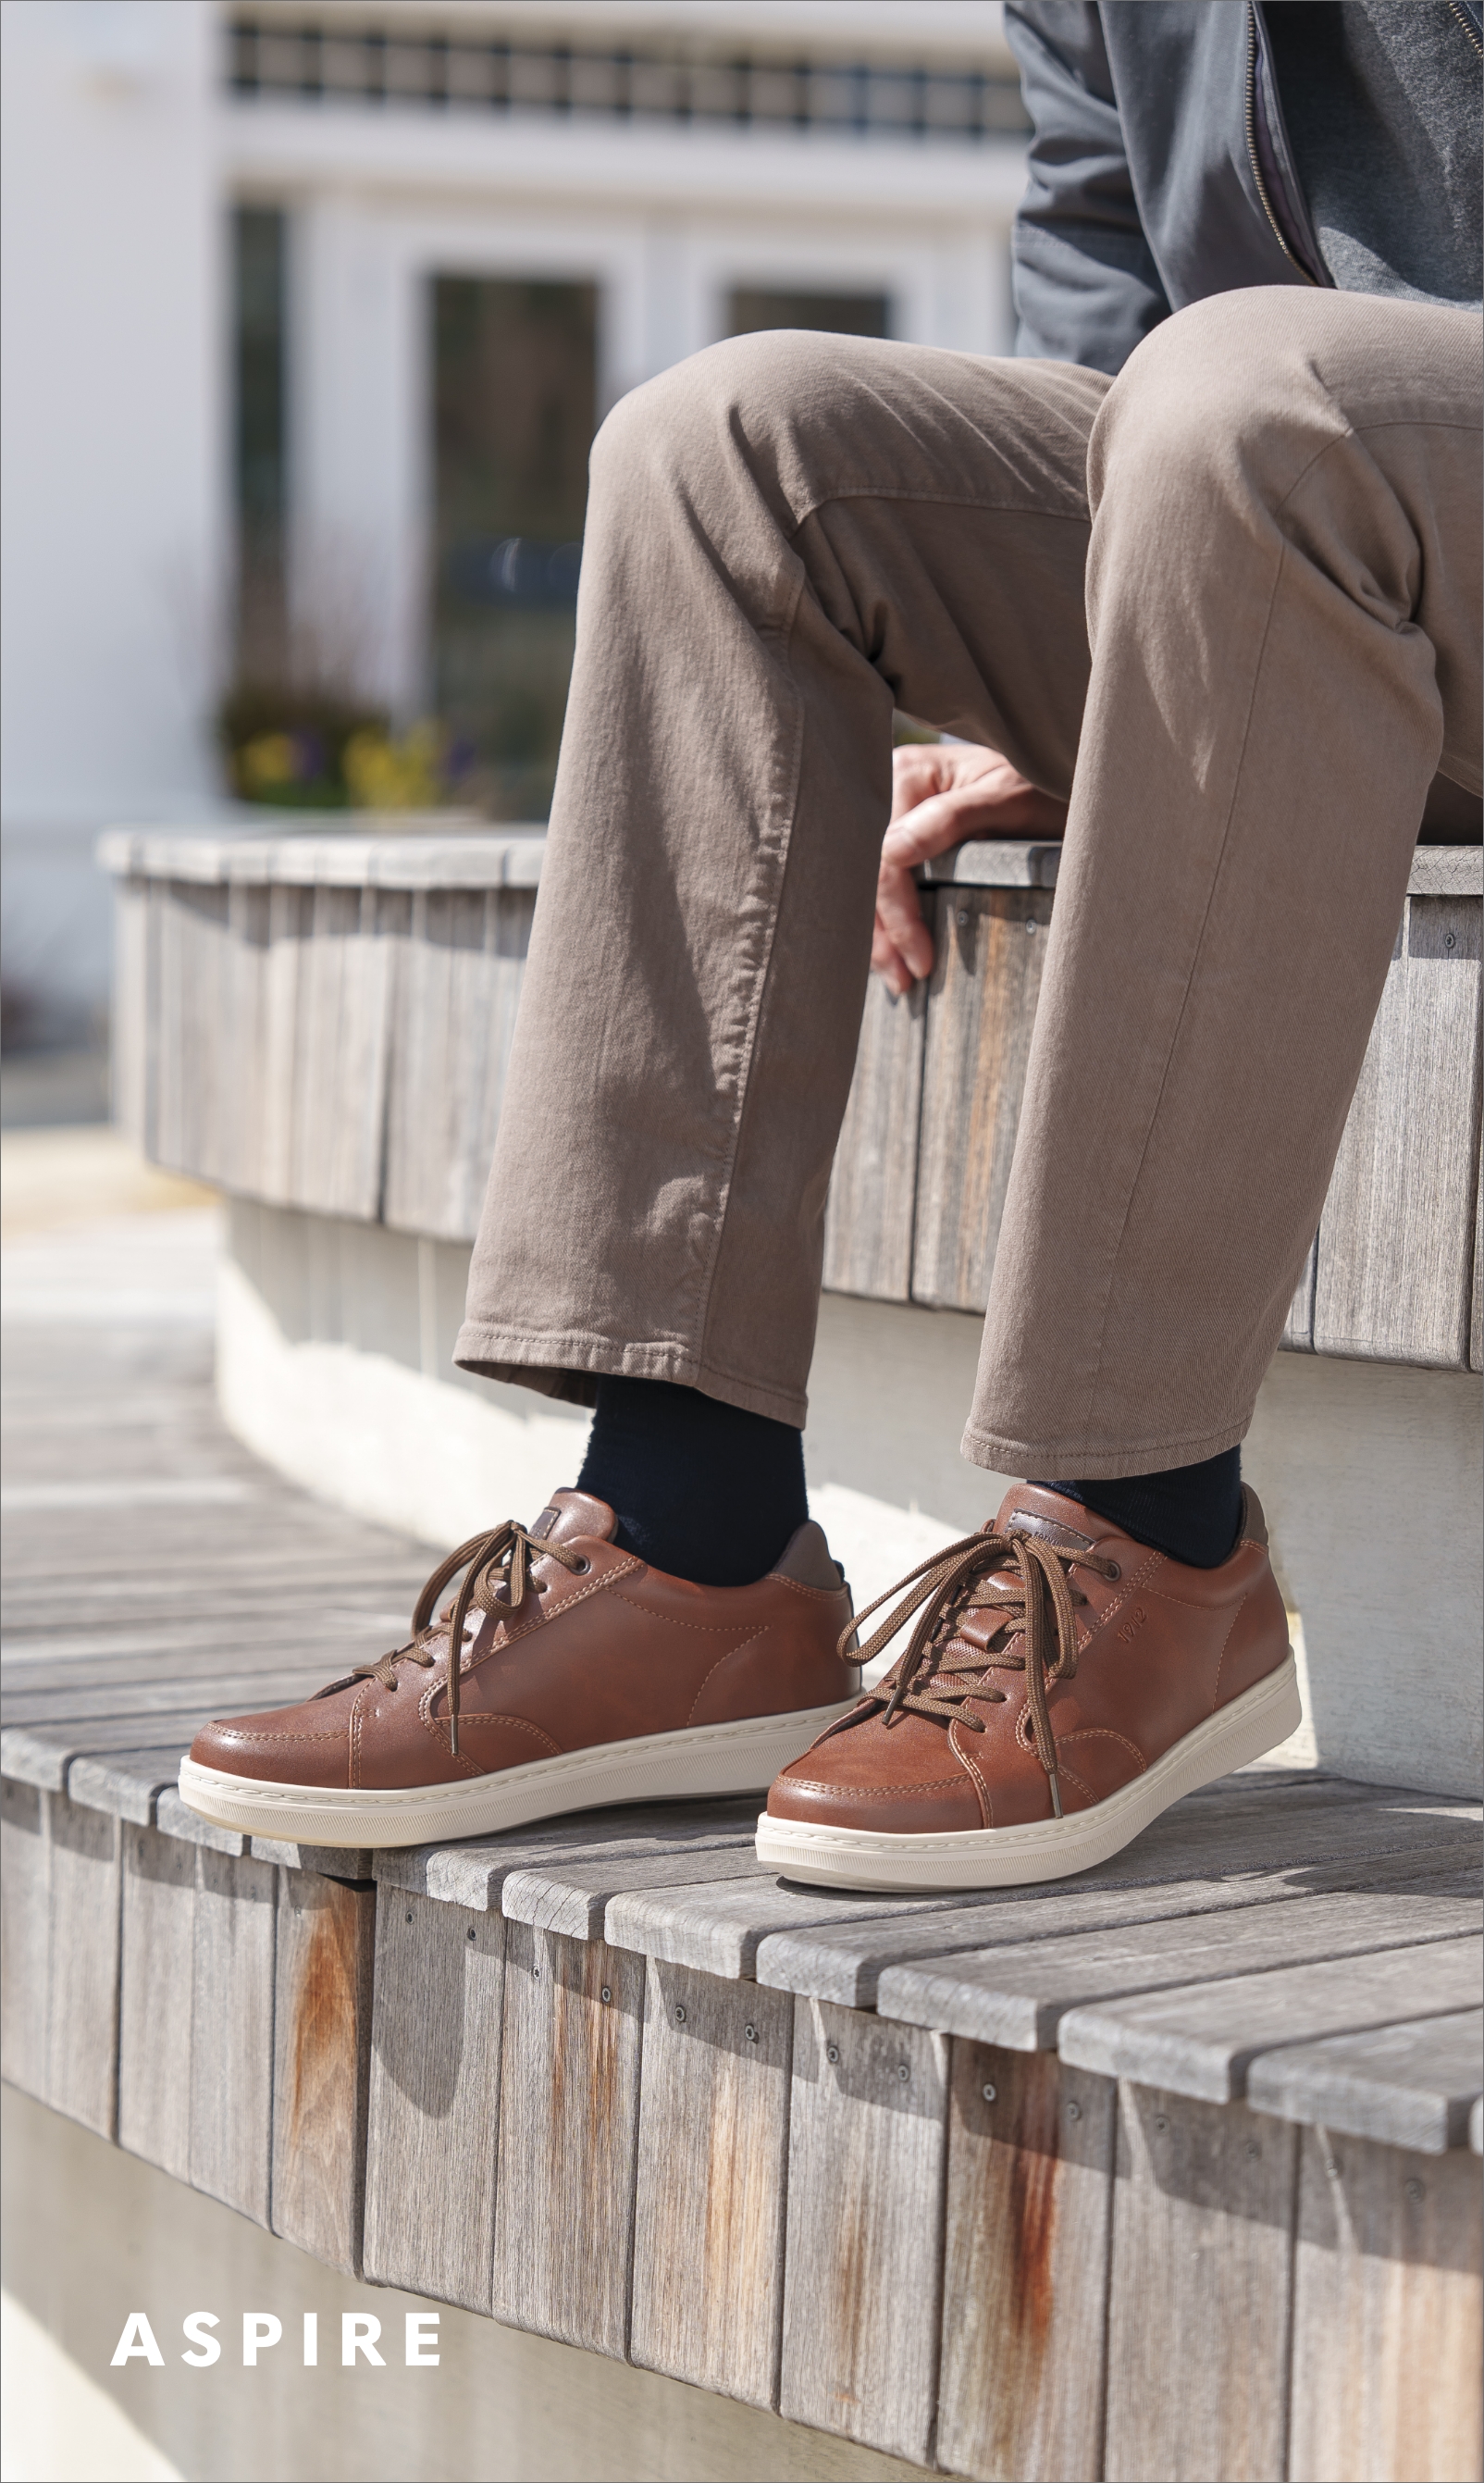 Men's Casual Shoes category. Image features the Aspire sneaker in cognac. 